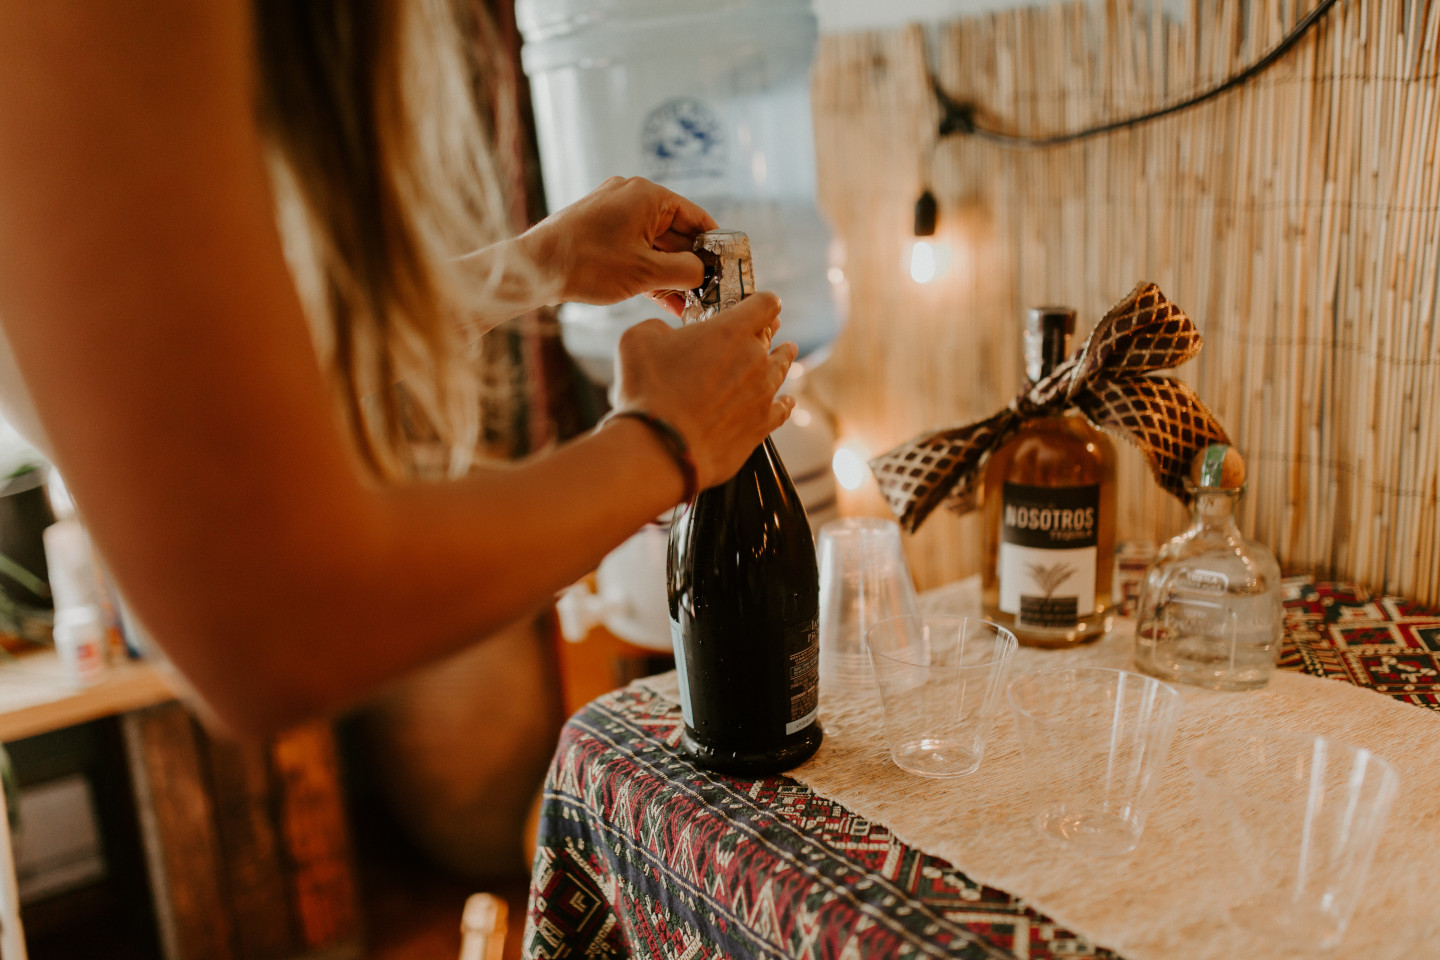 A bottle of champagne in Corvallis. Intimate wedding photography in Corvallis Oregon by Sienna Plus Josh.